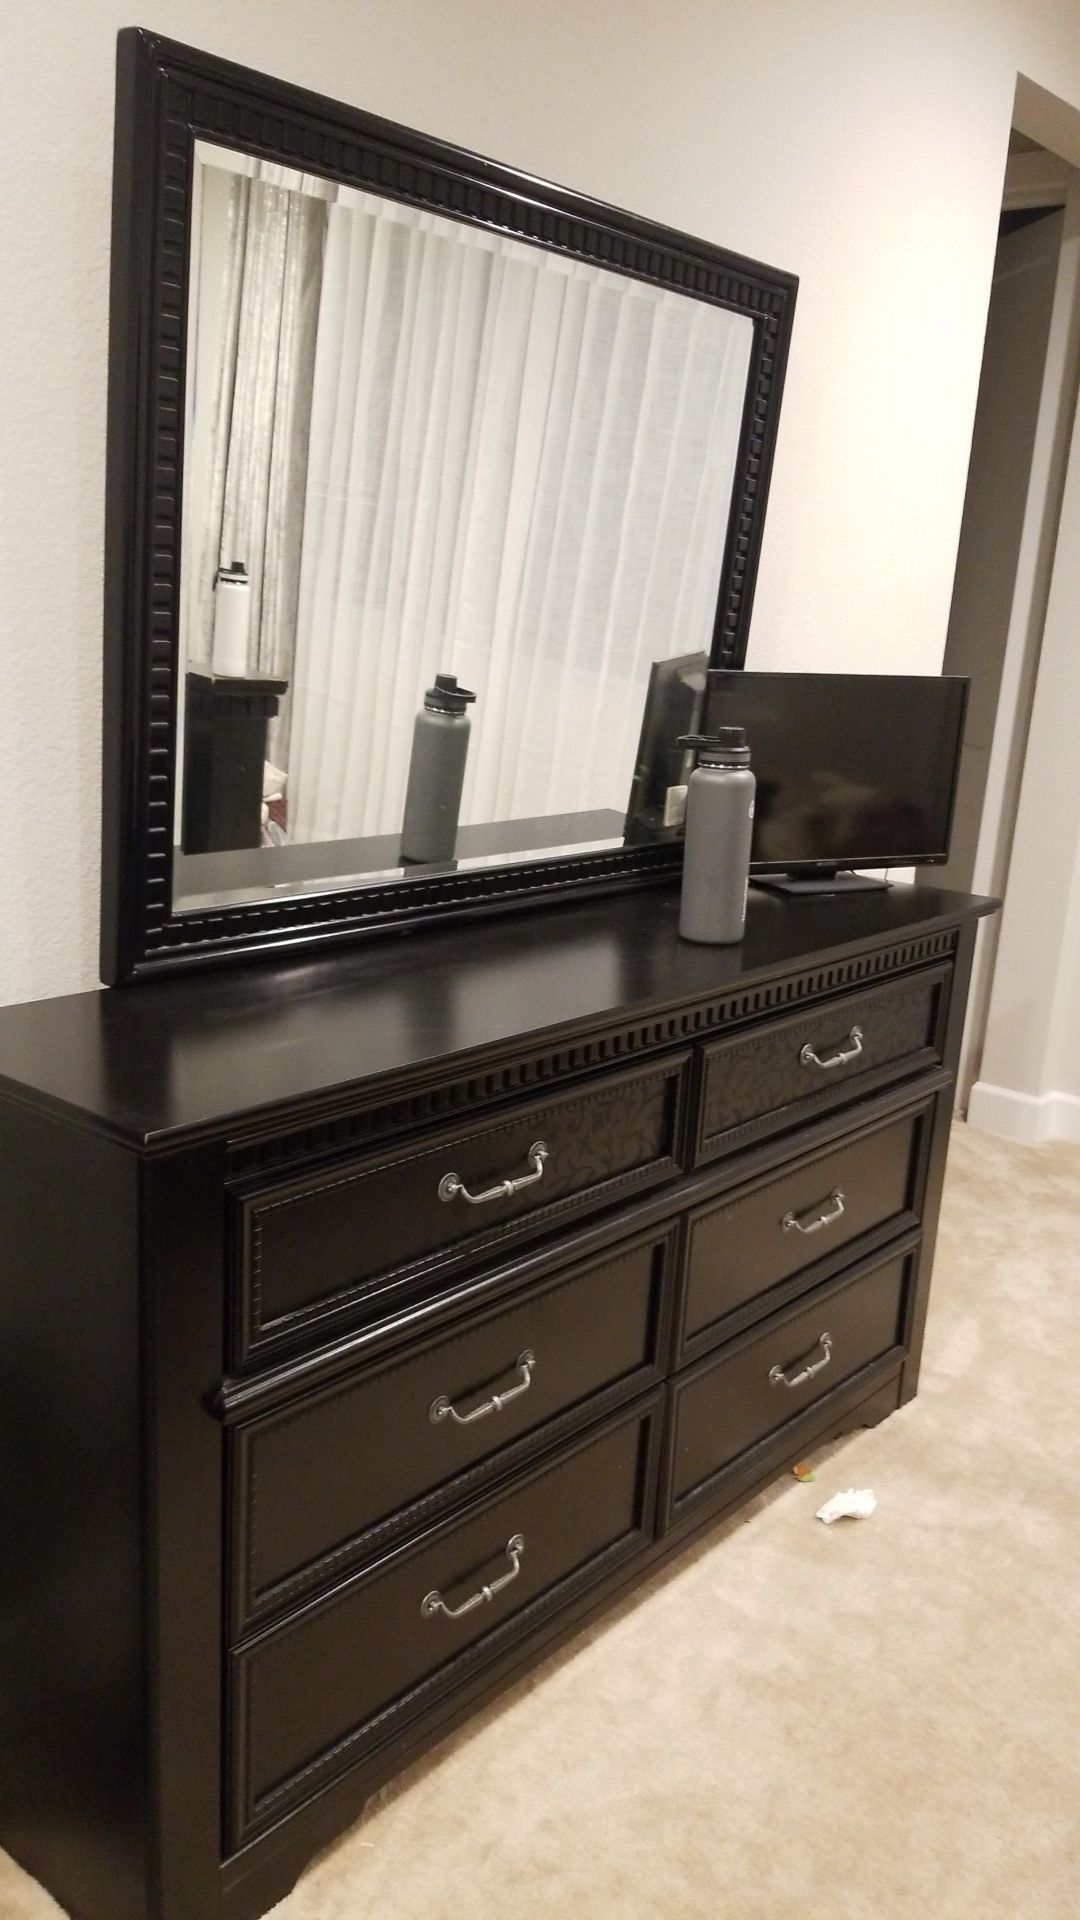 6 drawer dresser with mirror with inlay design on 1st row drawers. (read the description!)